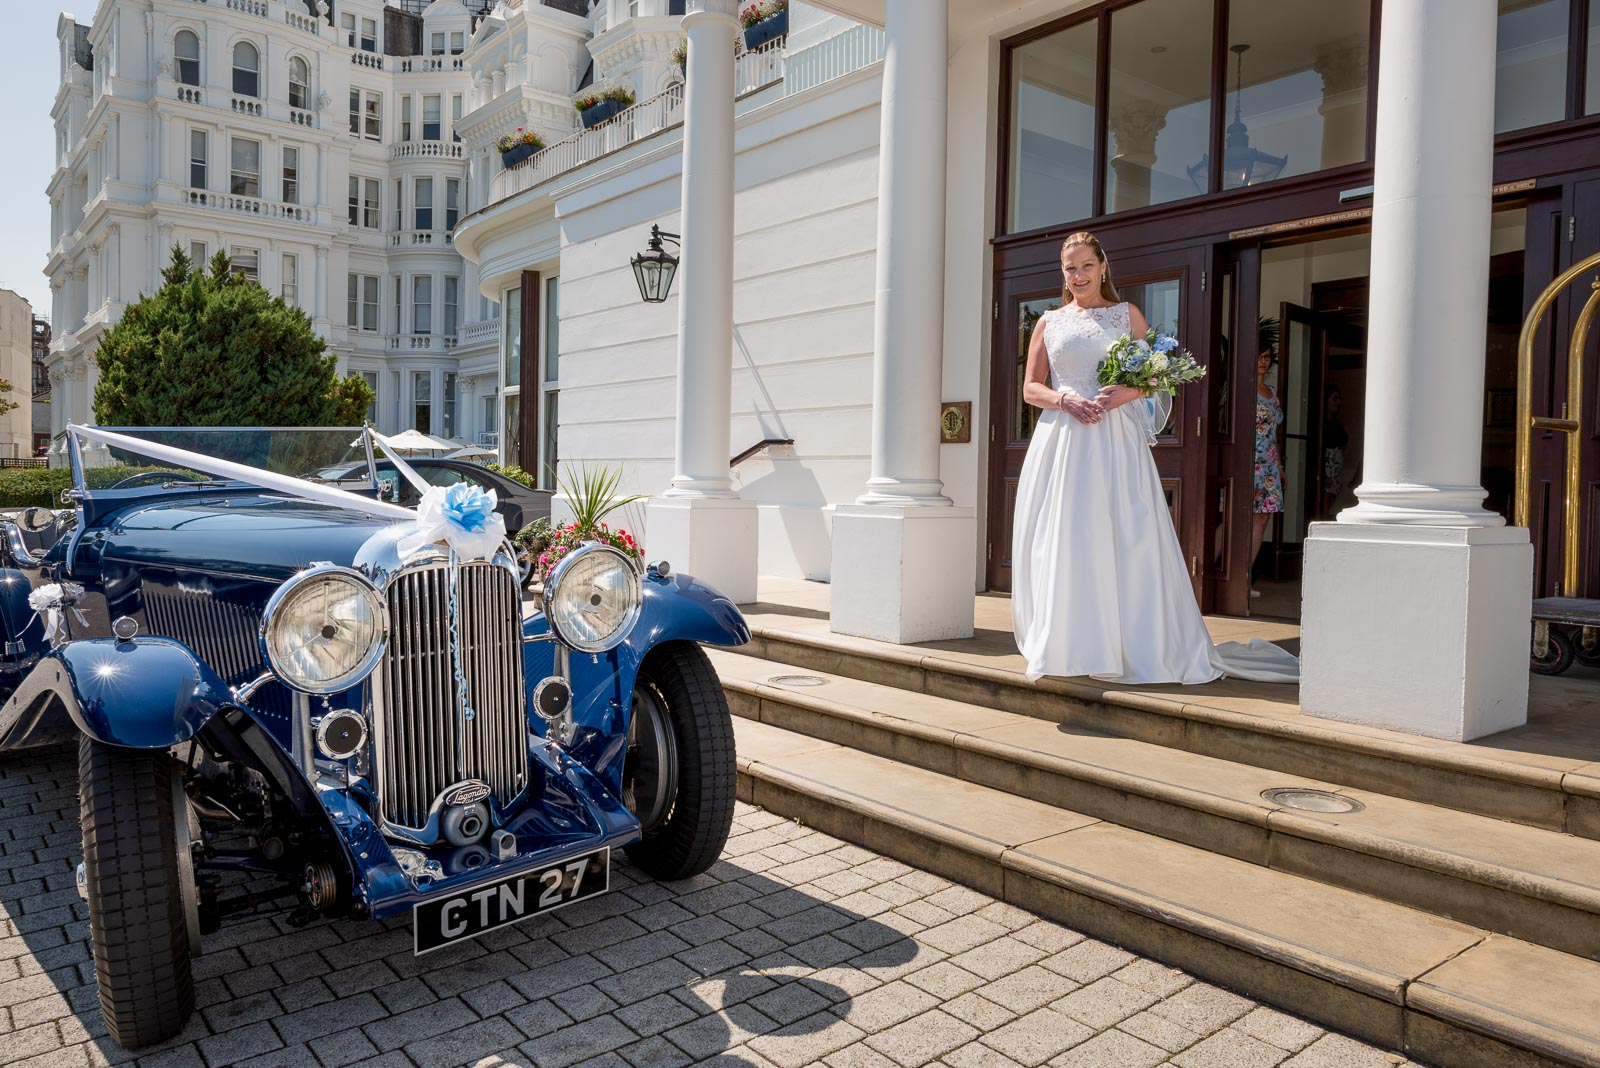 Donna is photographed with her wedding car.